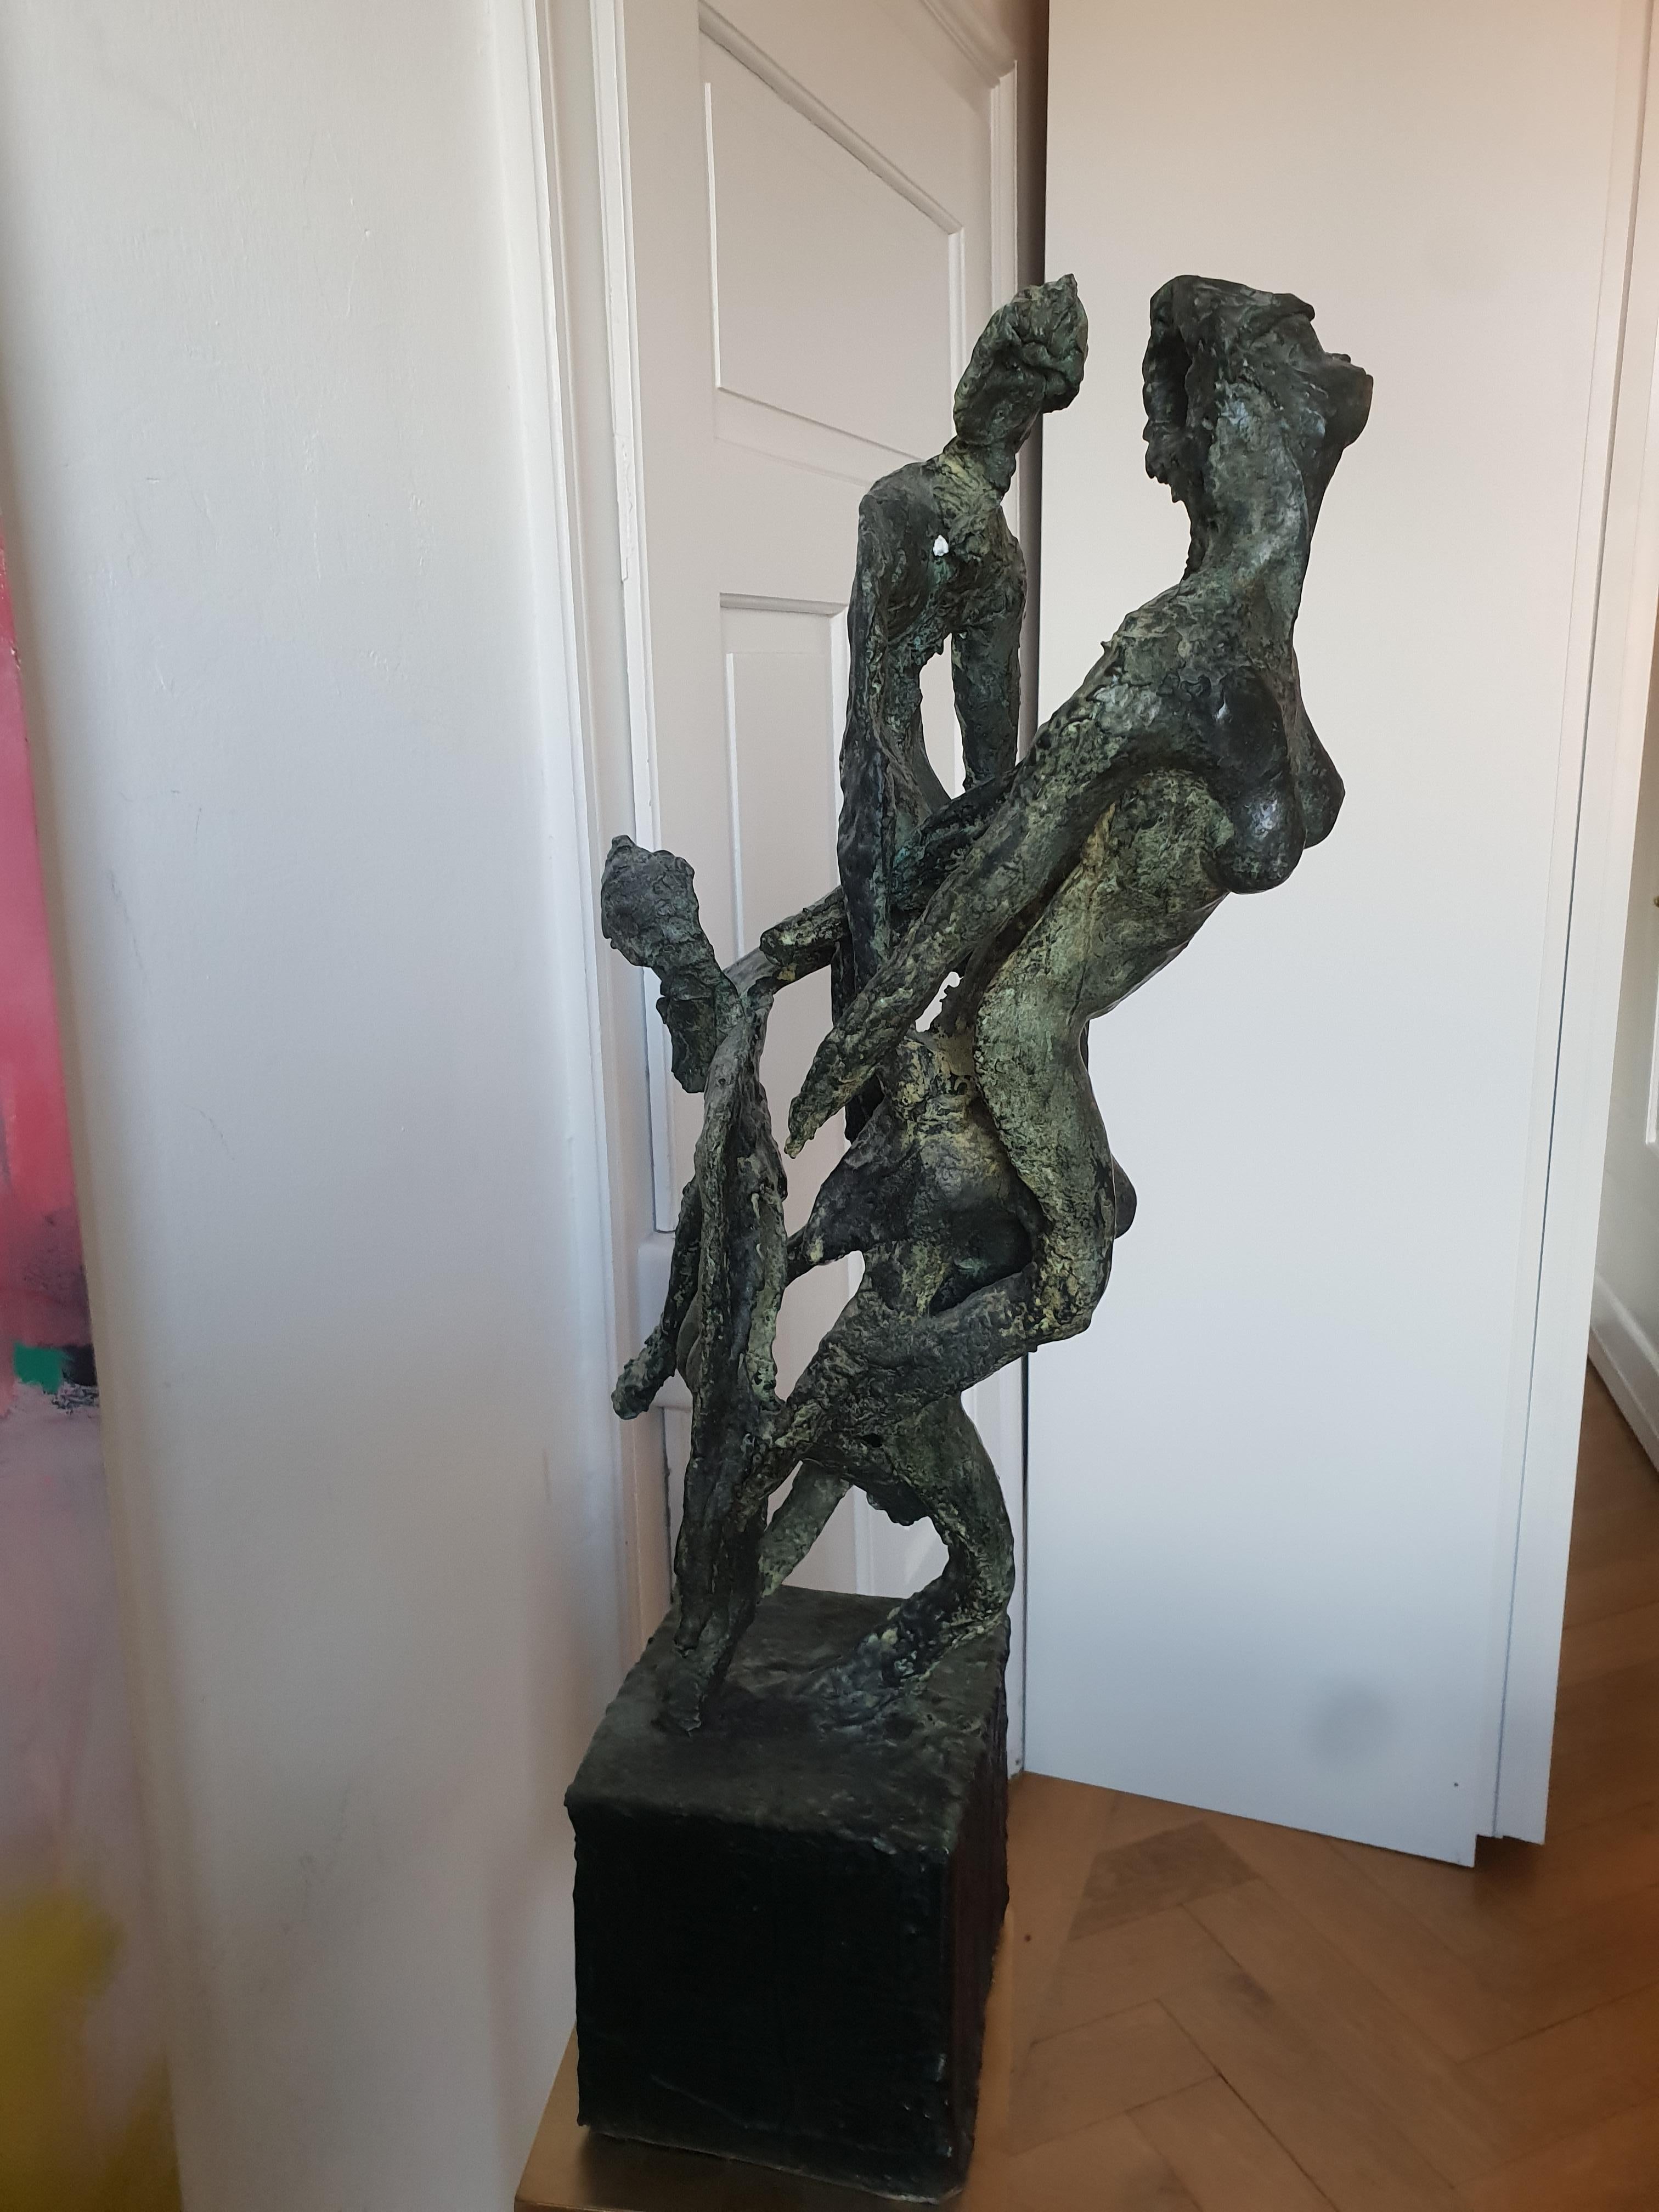 Nymphs by Emmanuel Okoro sculpture of nude female nymphs, black / green patina 6